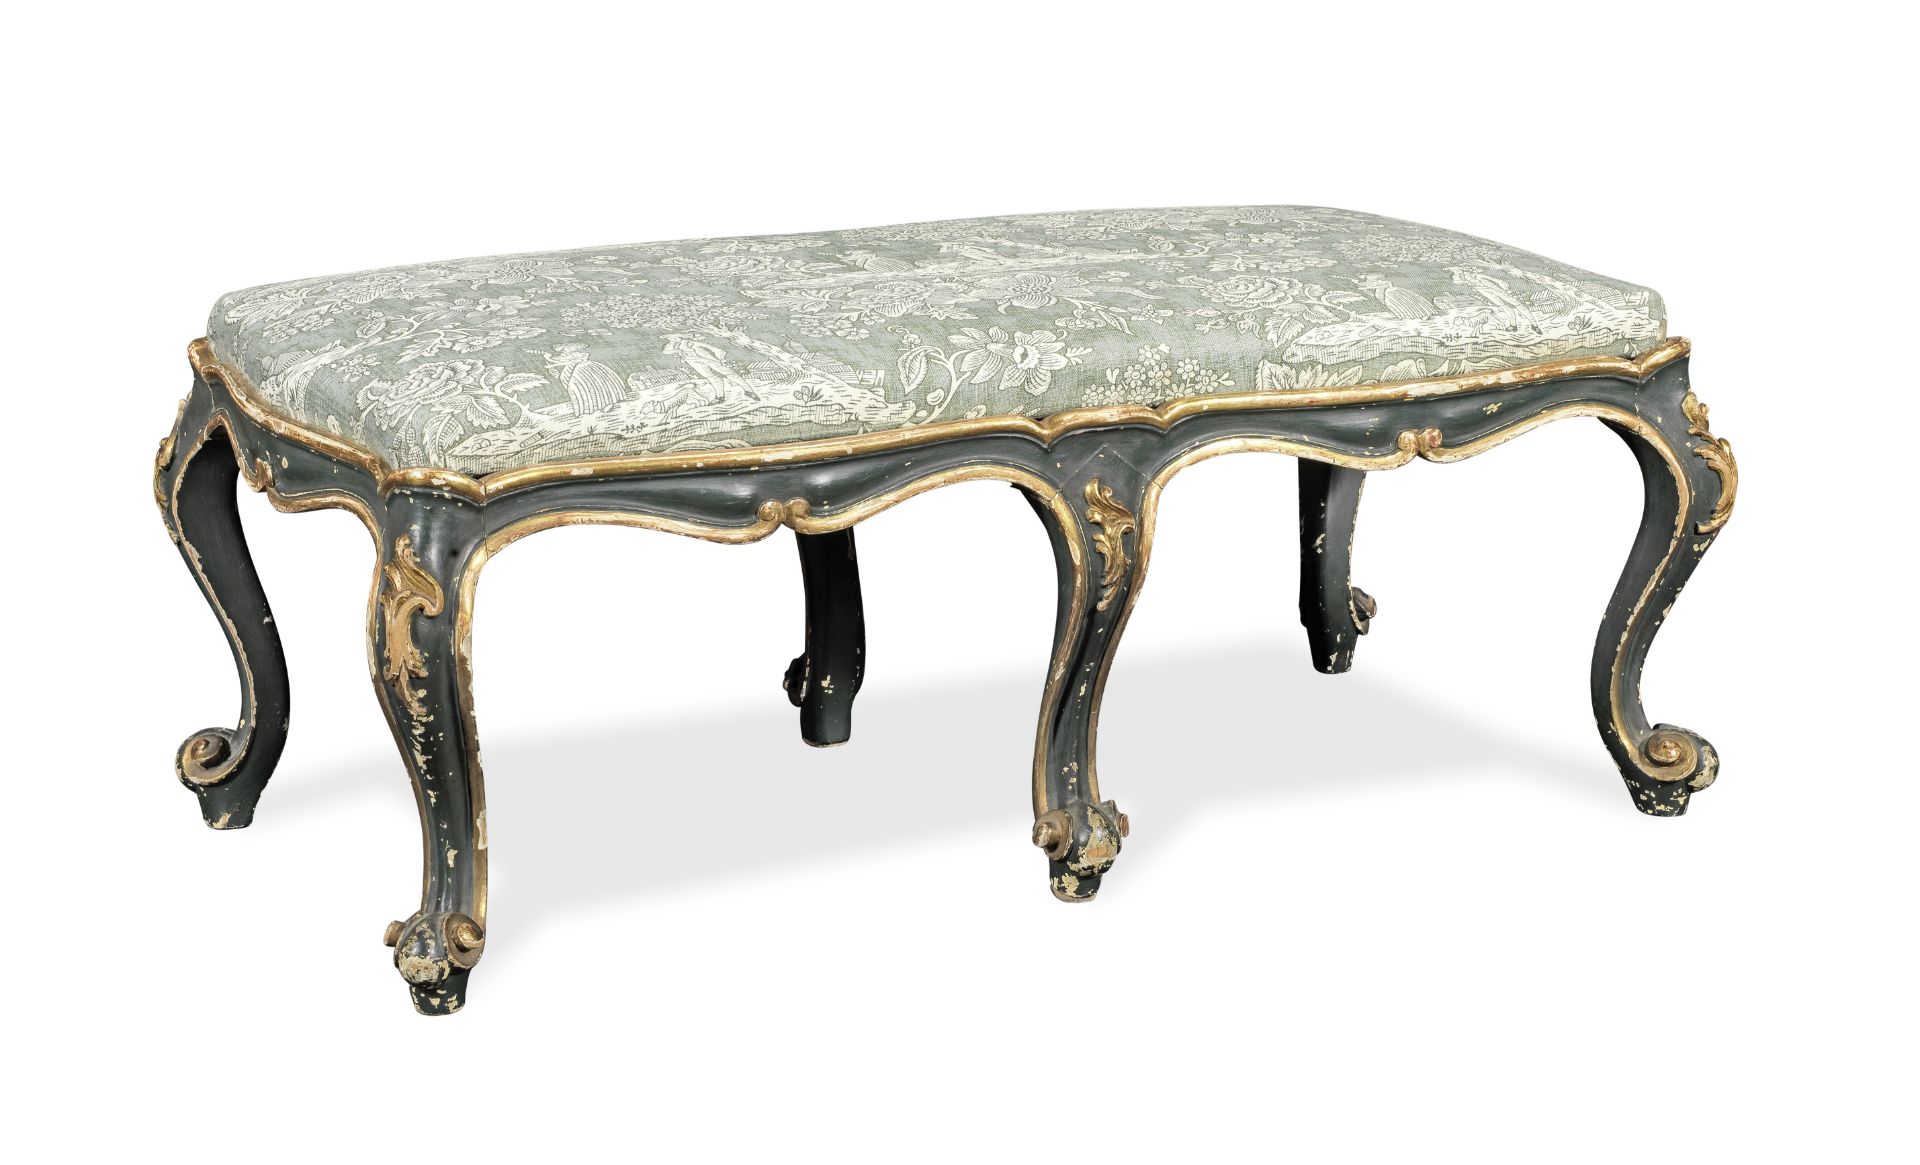 An Italian late 19th/early 20th century 'Rococo revival' painted and parcel gilt long stool